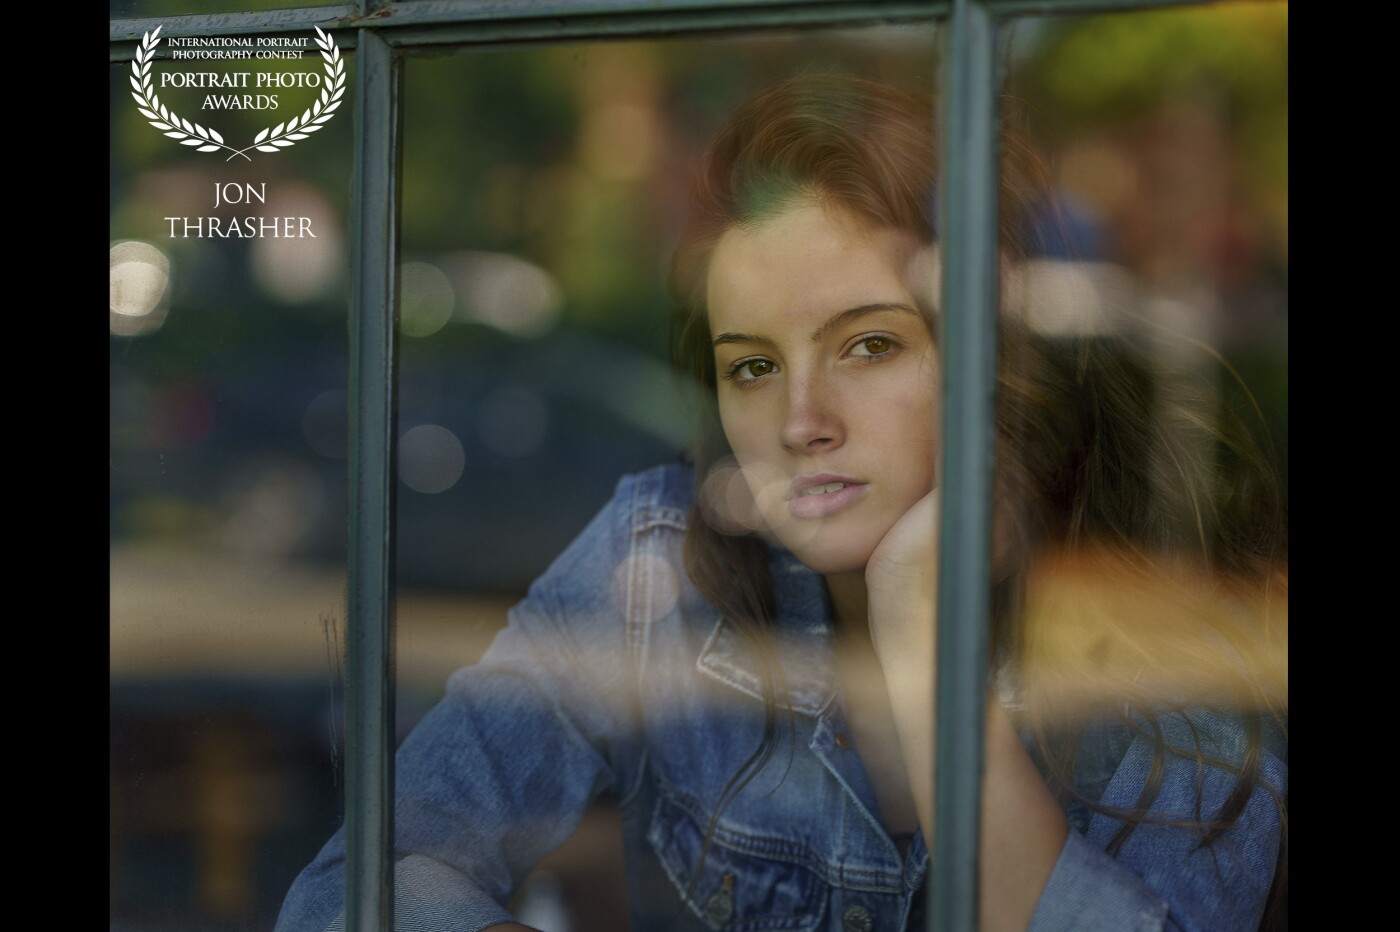 This image of the teen model, McKenna Driscoll (instagram.com/mckenna.driscoll), was captured in the Historic Southend neighborhood of Charlotte, NC.,  through the windows of the new Superica Restaurant. This historic building was once an old textile mill and when recently renovated, the old brick structure and industrial windows were left intact creating some excellent photo shoot locations. McKenna is represented by MP Miami (instagram.com/mpmanagementmiami).